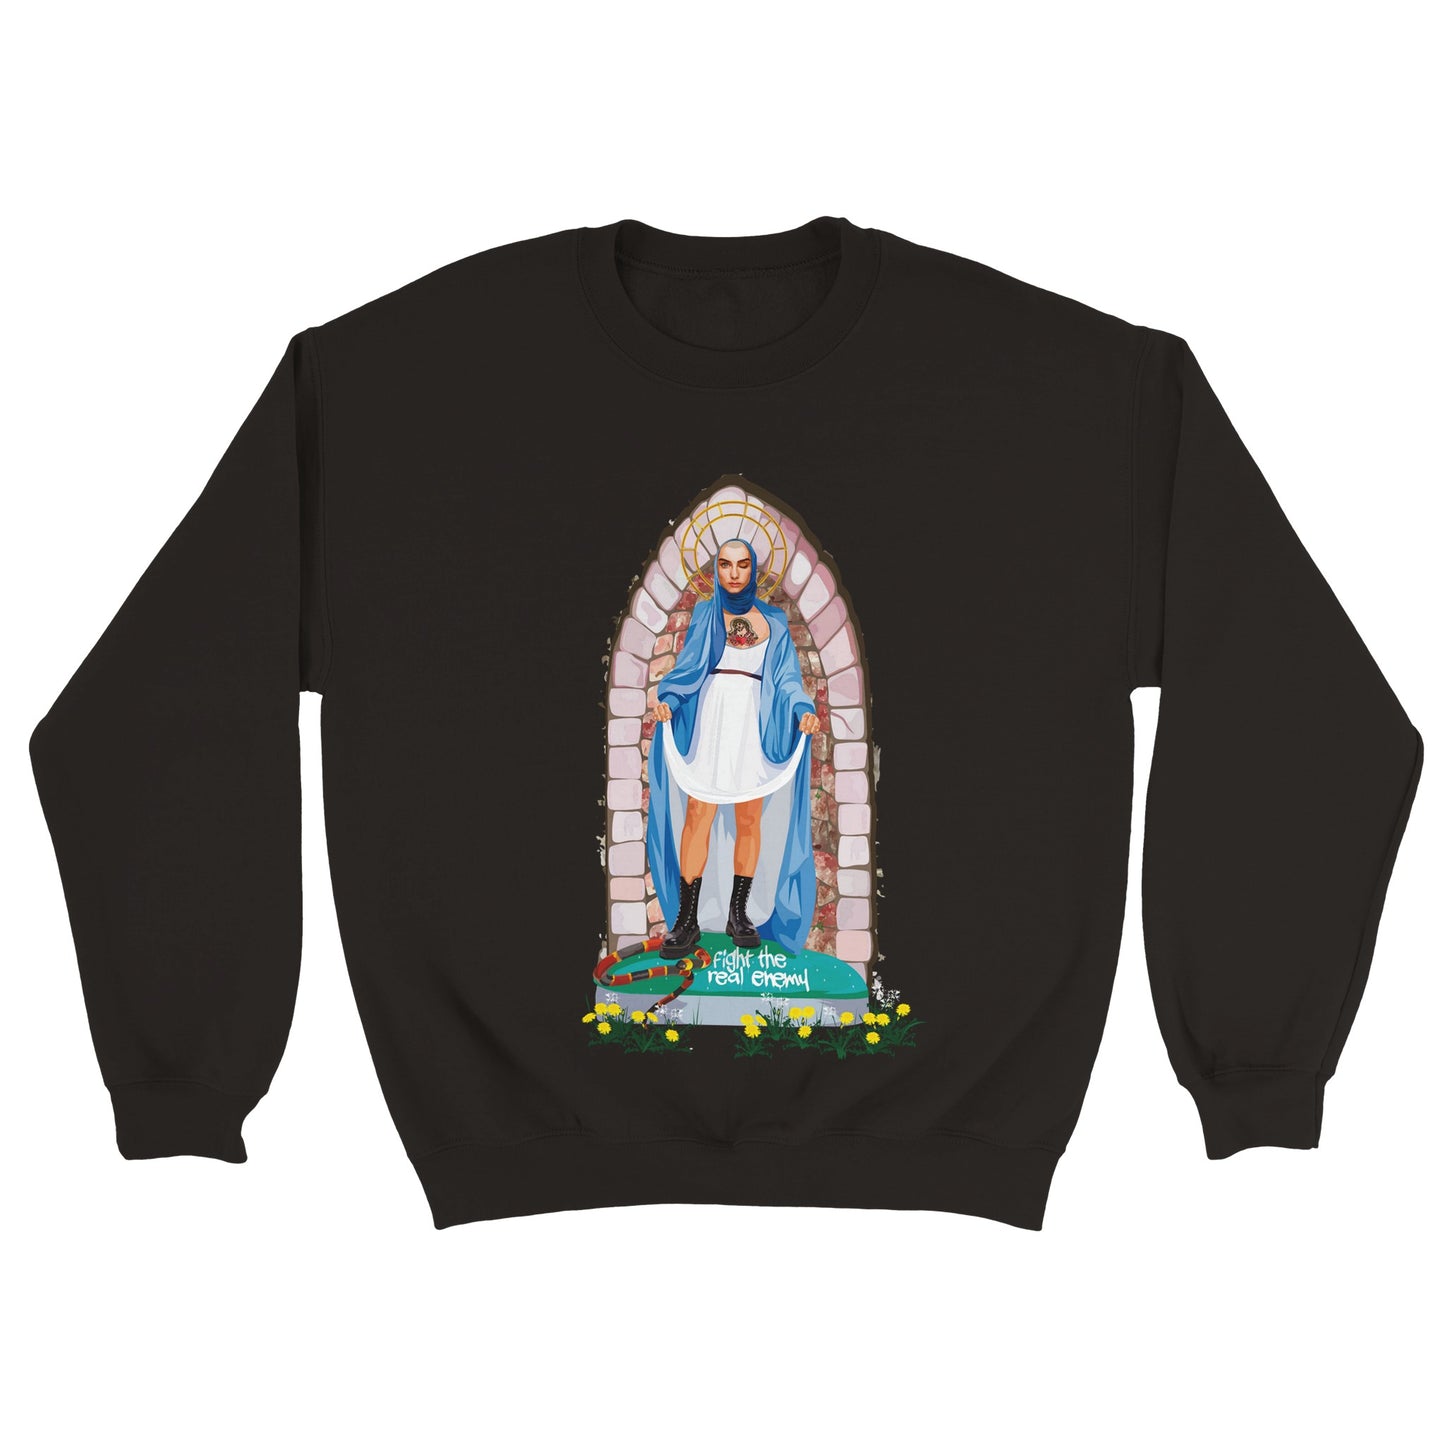 Our Lady of the Sorrows Unisex Sweatshirt